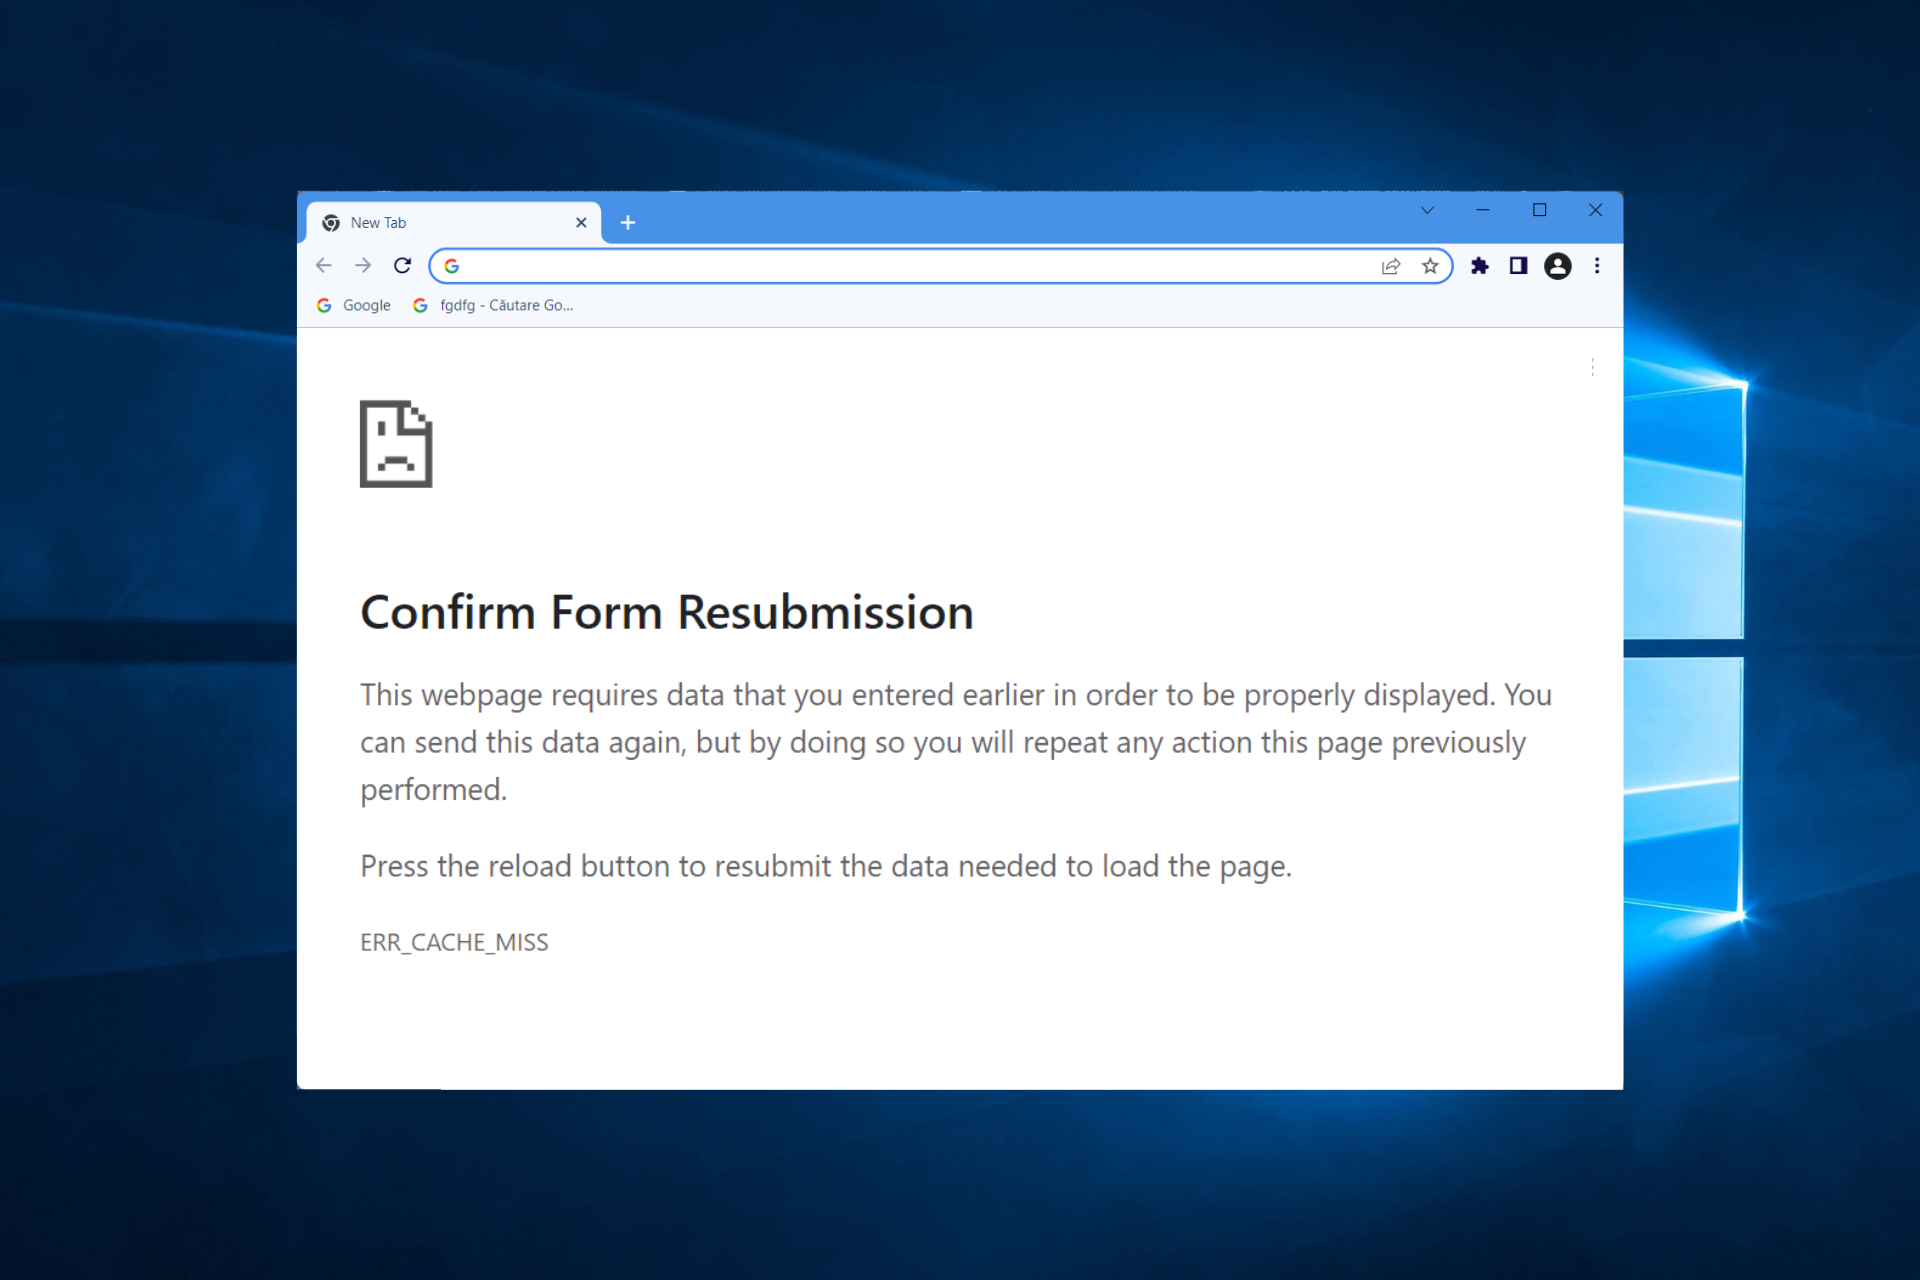 err-form confirm form resubmission err_cache_miss